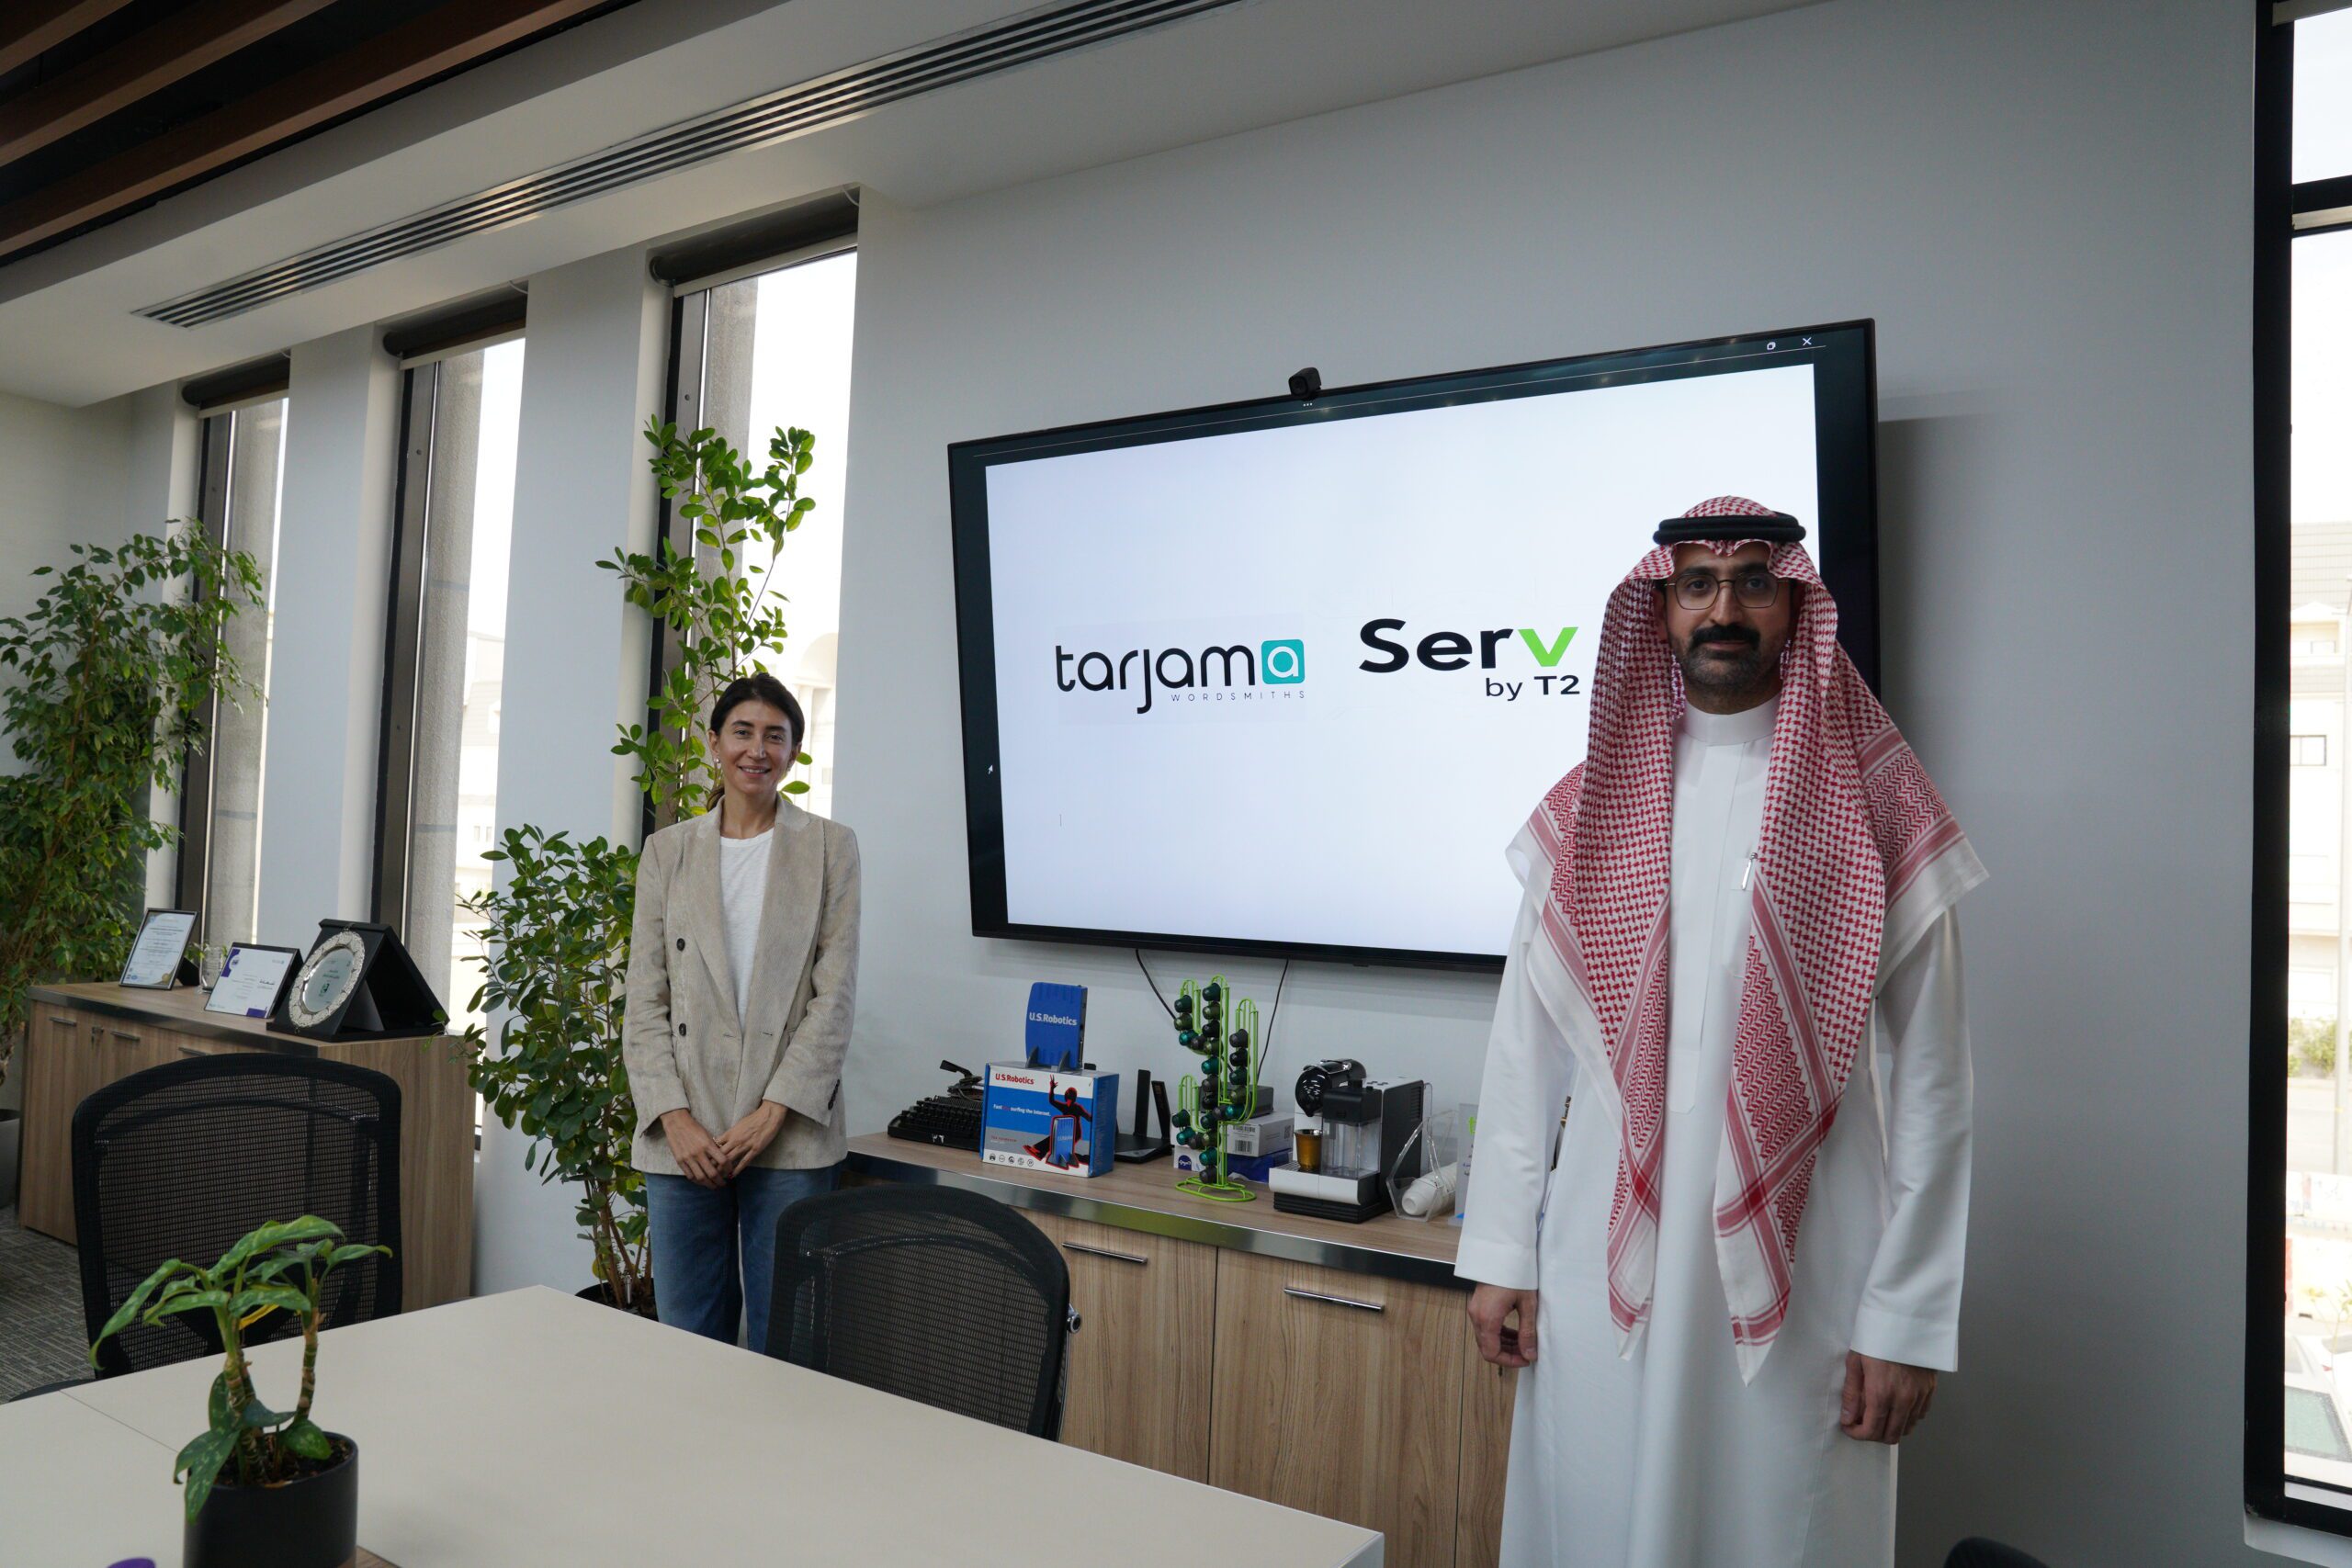 Tarjama and Serv by T2 Saudi Arabia Forge Strategic Partnership for Promotion and Resale of Language Technology Products